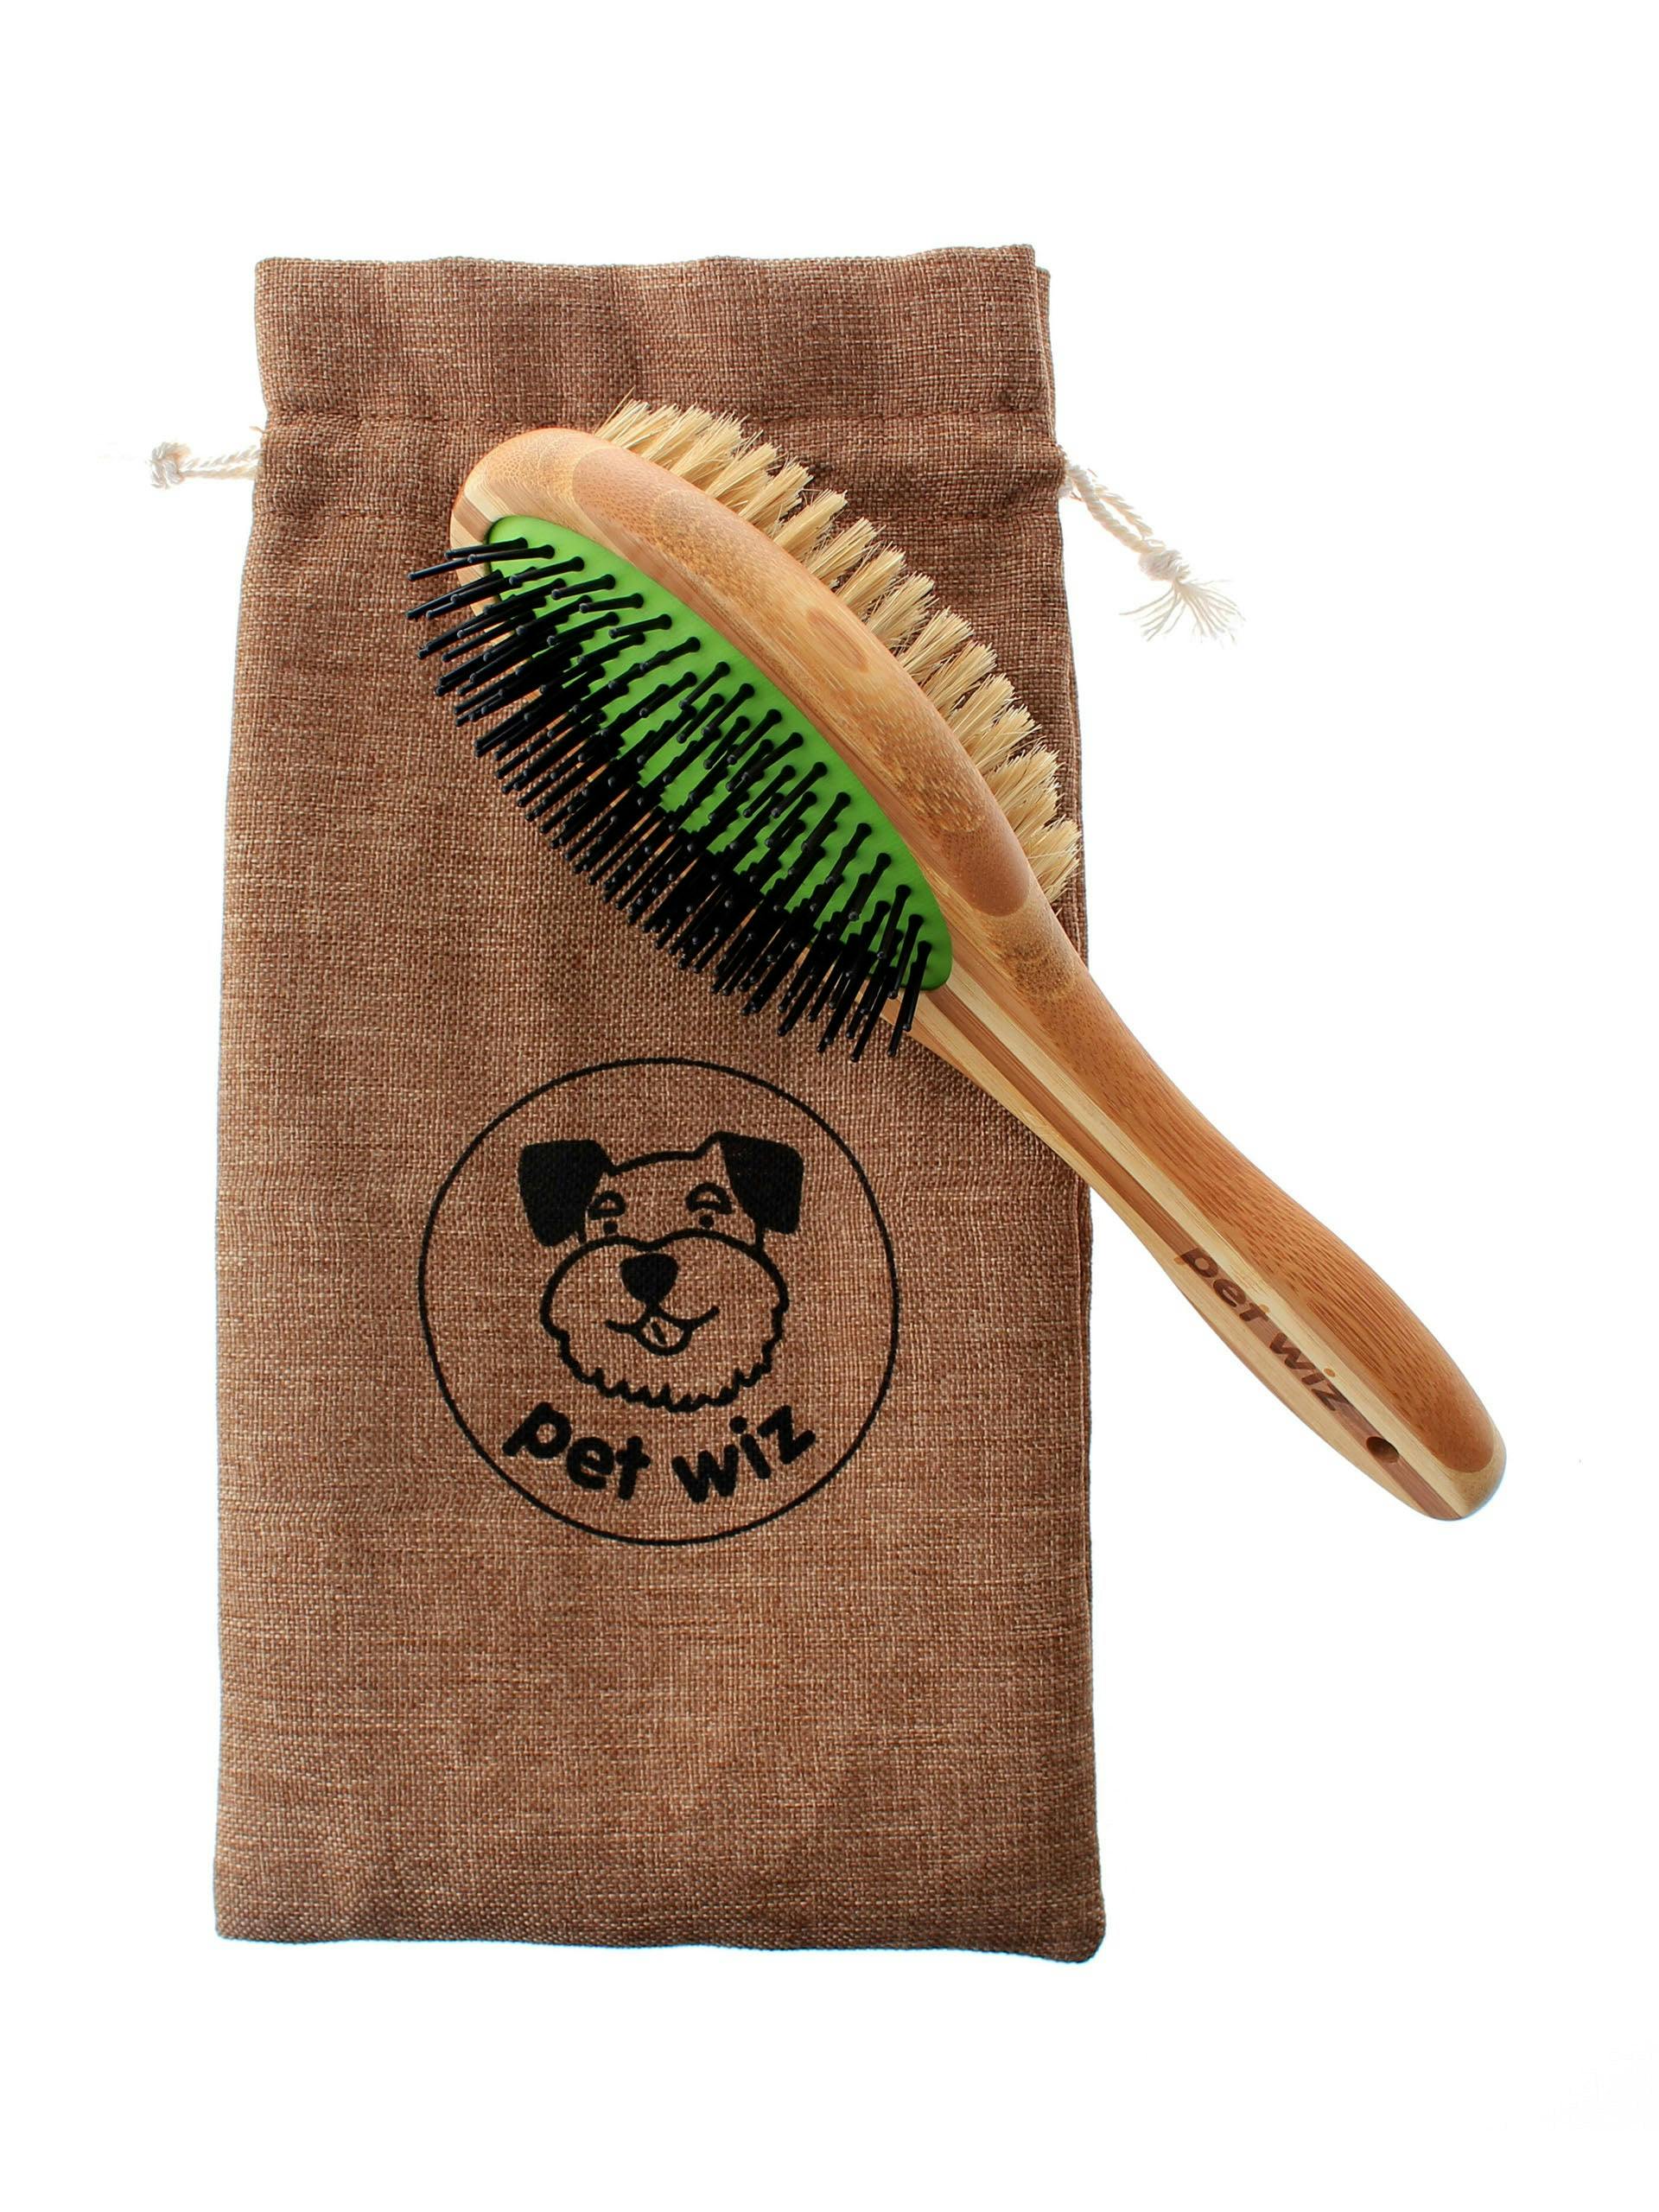 Double sided pin and bristle bamboo dog brush